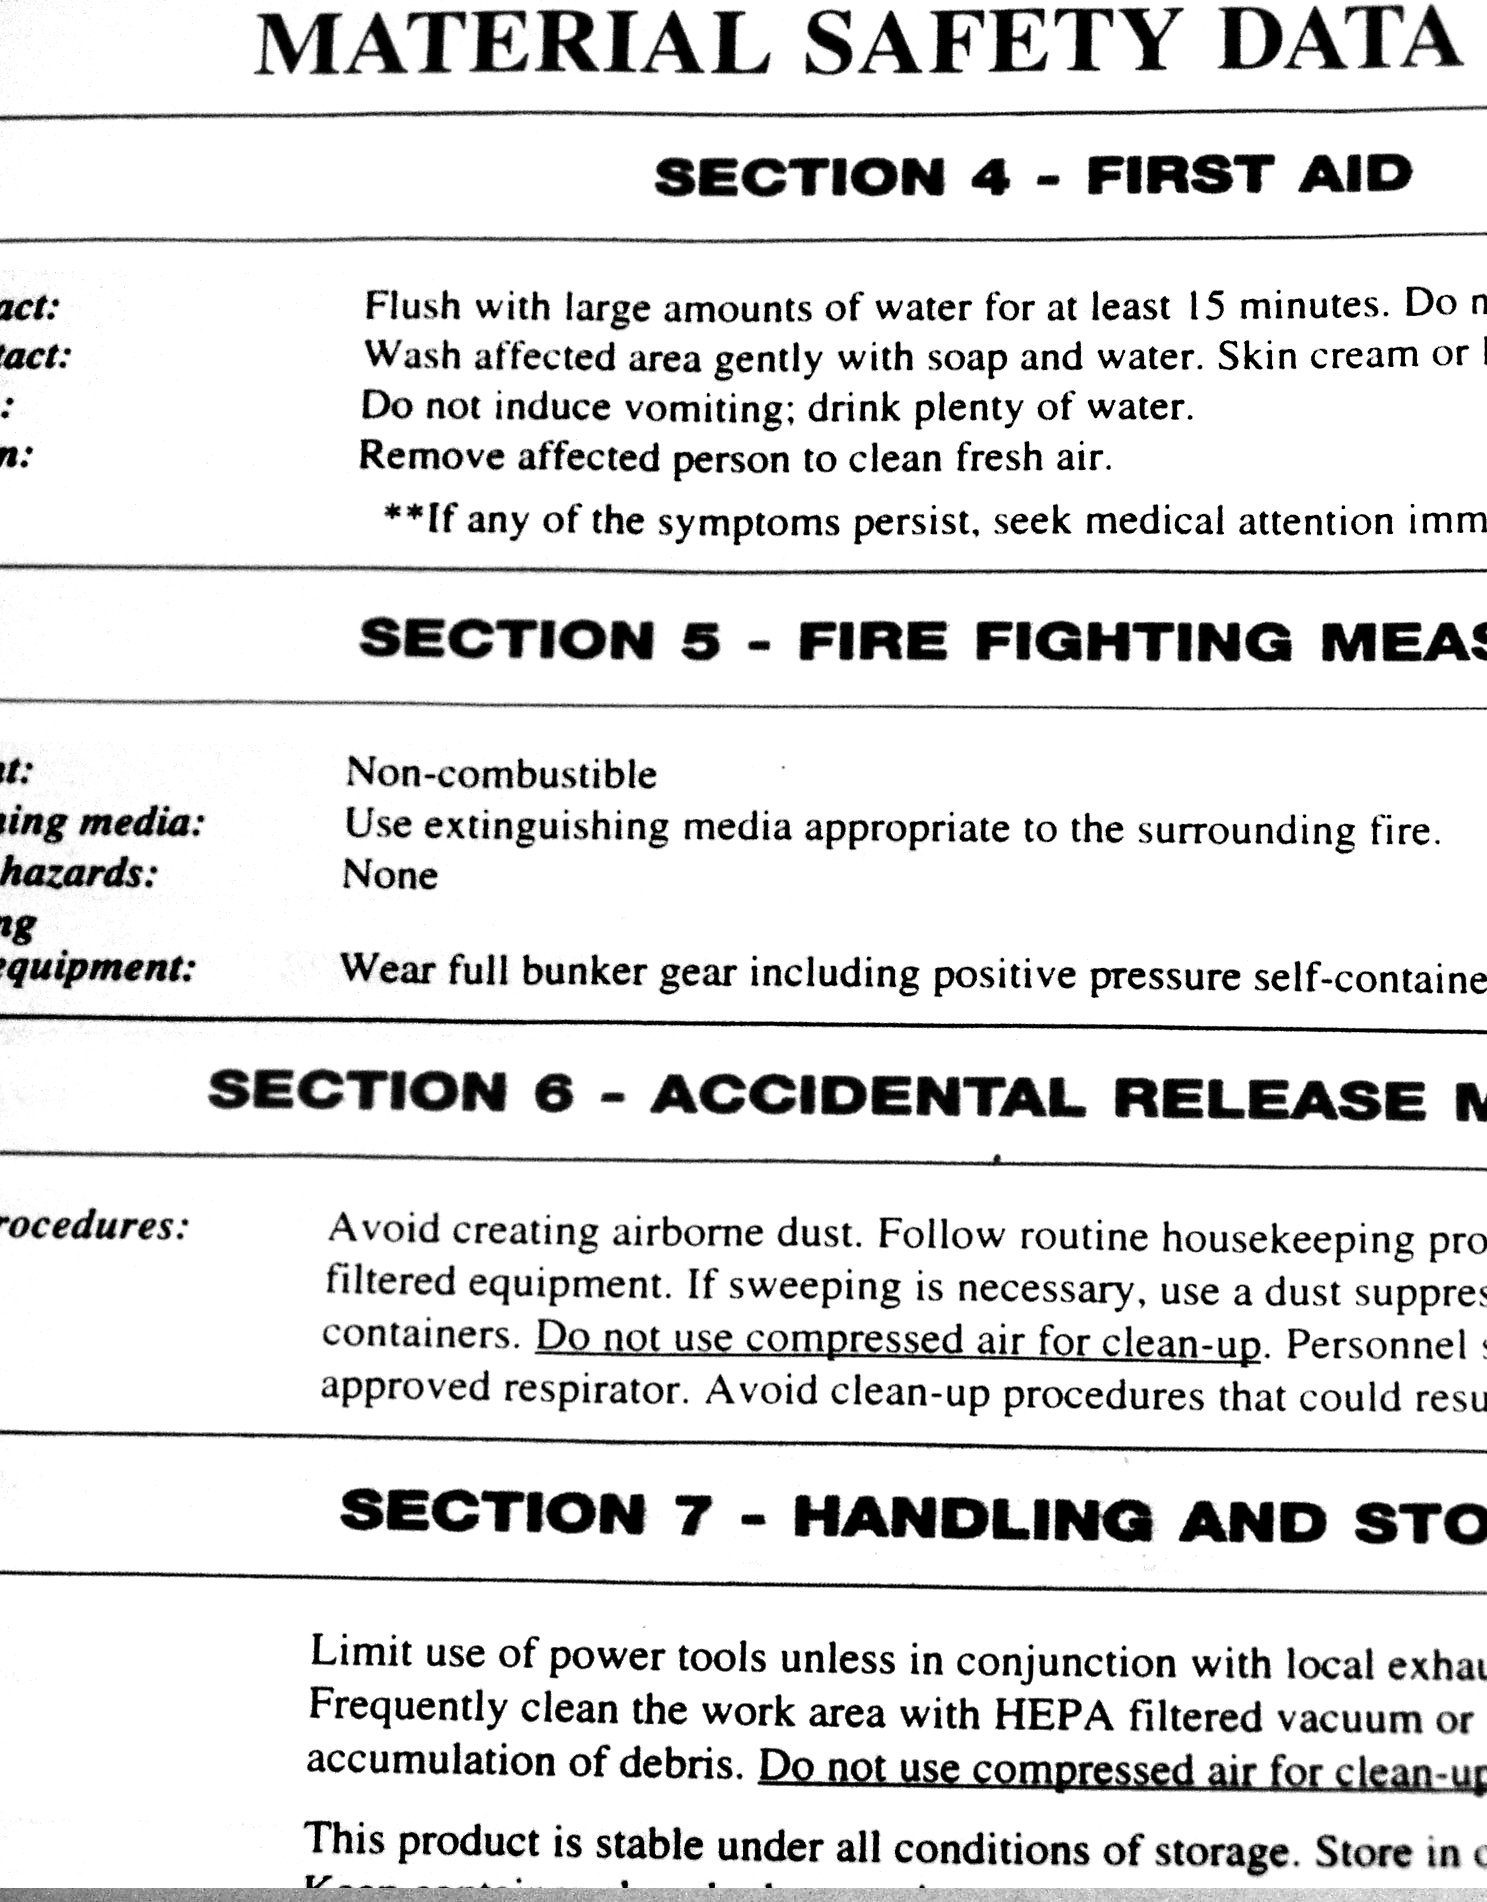 MSDS Material Safety Data Sheet Example Image